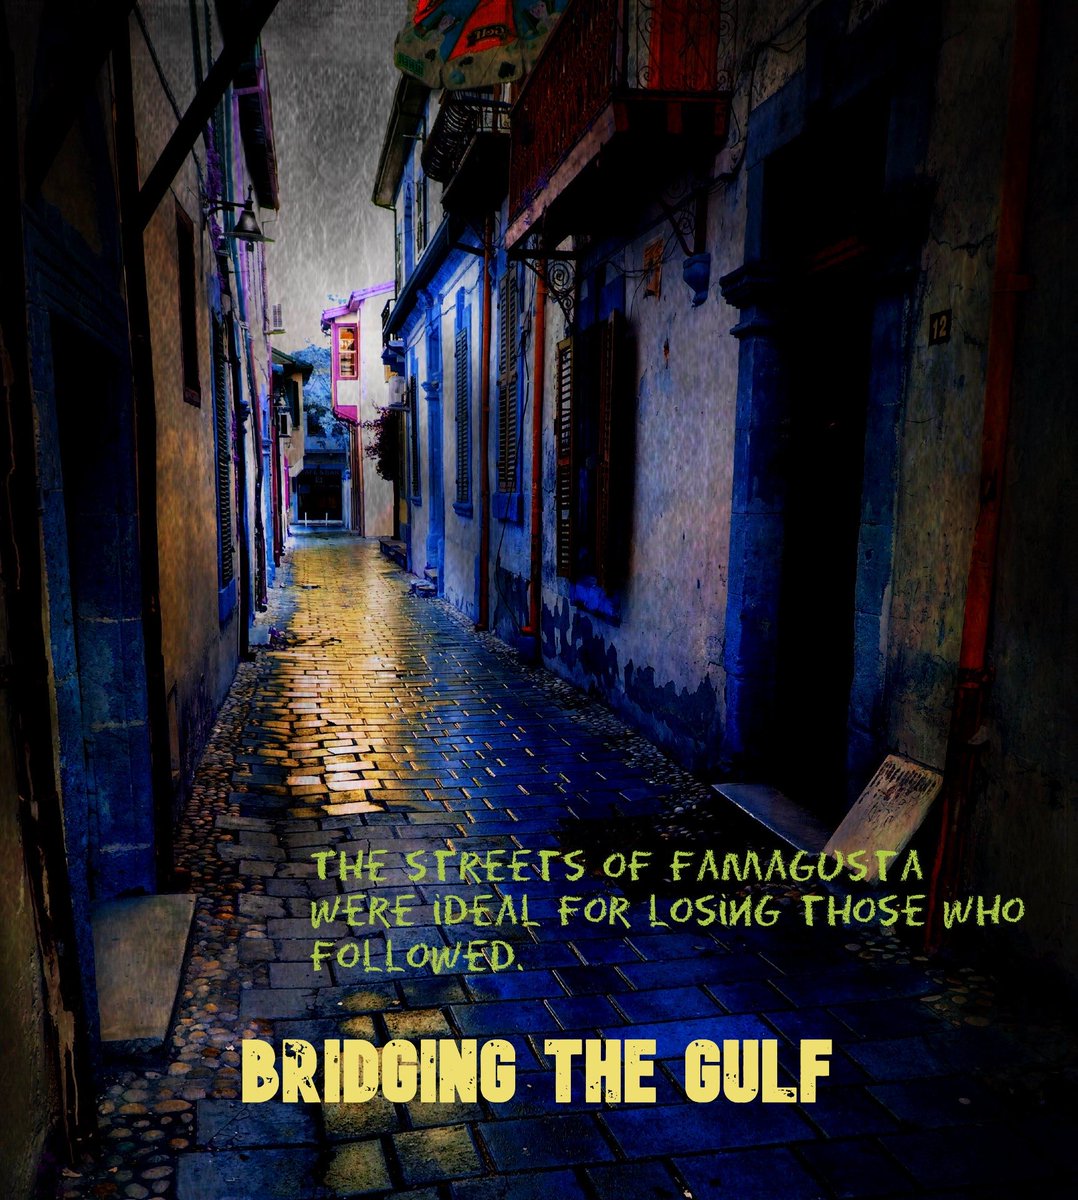 Bridging the Gulf is a thriller set in Yorkshire and North Cyprus. ⁦@FamagustaG⁩ ⁦@kyreniauni⁩ ⁦@kyreniahotel⁩ ⁦@CyprusToday⁩ ⁦@TalkingNCyprus⁩ Available for Kindle and in #paperback